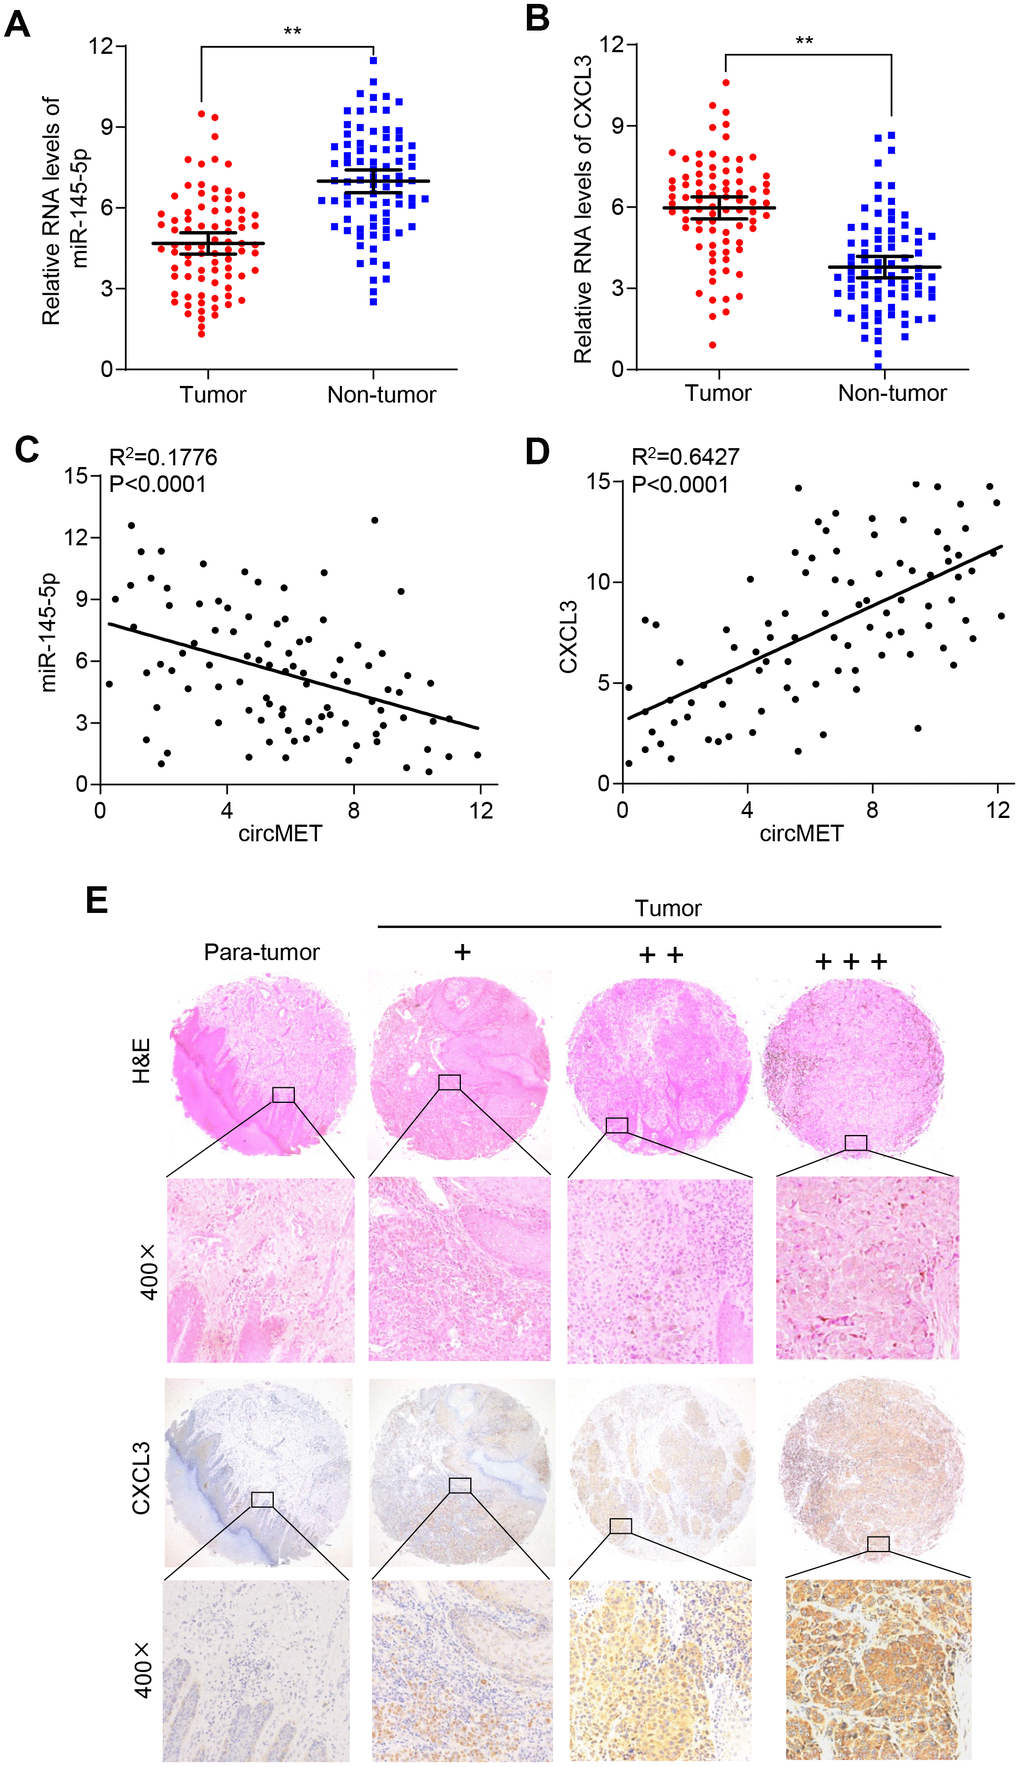 CXCL3 exerts oncogenic effects in NSCLC tissues. (A) and (B) miR-145-5p and CXCL3 expression were detected in 94 paired NSCLC tissues and adjacent normal tissues using qRT-PCR. GAPDH was used as a control for loading. (C) A negative correlation between miR-145-5p and circMET was observed in NSCLC tissues. (D) A positive correlation between circMET and CXCL3 was observed in NSCLC tissues. (E) Representative images of TMA stained with H&E and IHC for CXCL3 expression in NSCLC tissues and adjacent nontumor tissues (−, absent; +, weak; ++, moderate; and +++, strong). Scale bar: 100um. The data are represented as the mean ± SD, * p 